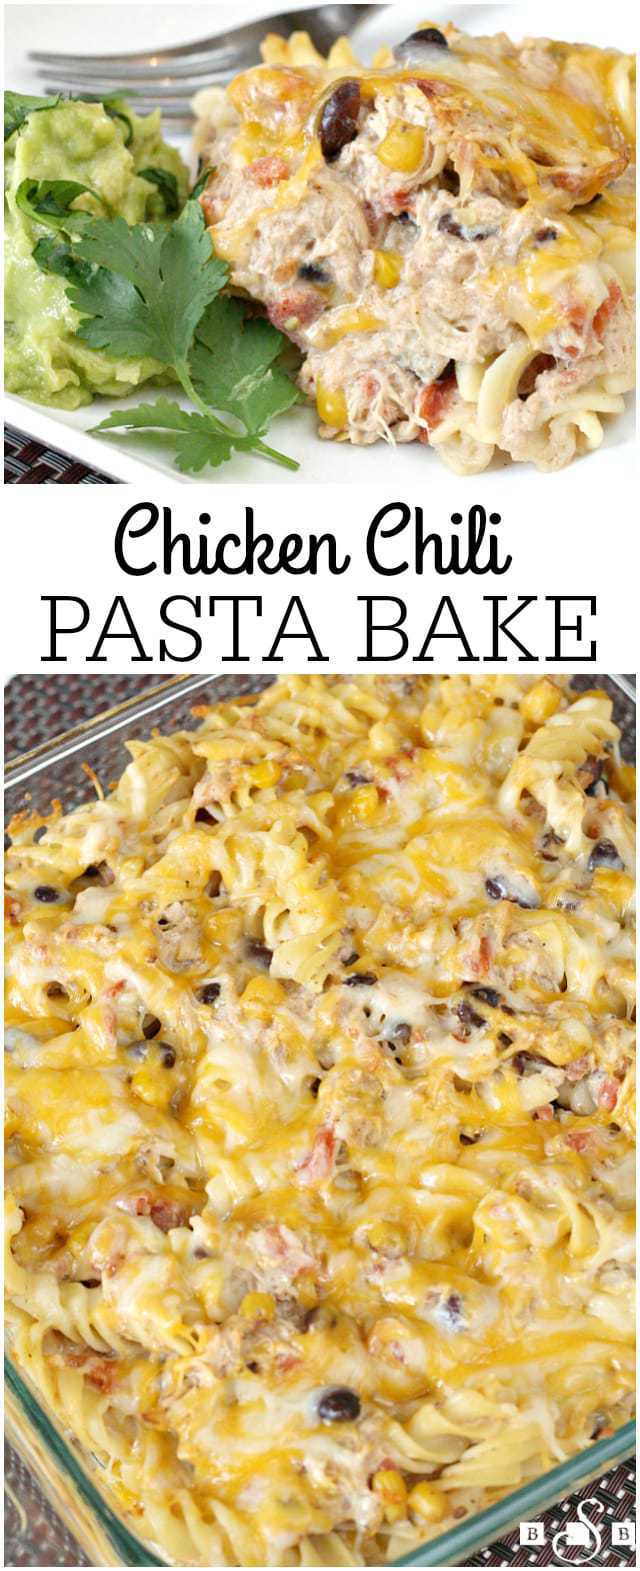 From the original Chicken Chili recipe, I created a Chicken Chili Pasta Bake and also a delicious Chicken Chili salad. Add a few garnishes and your meal is complete!